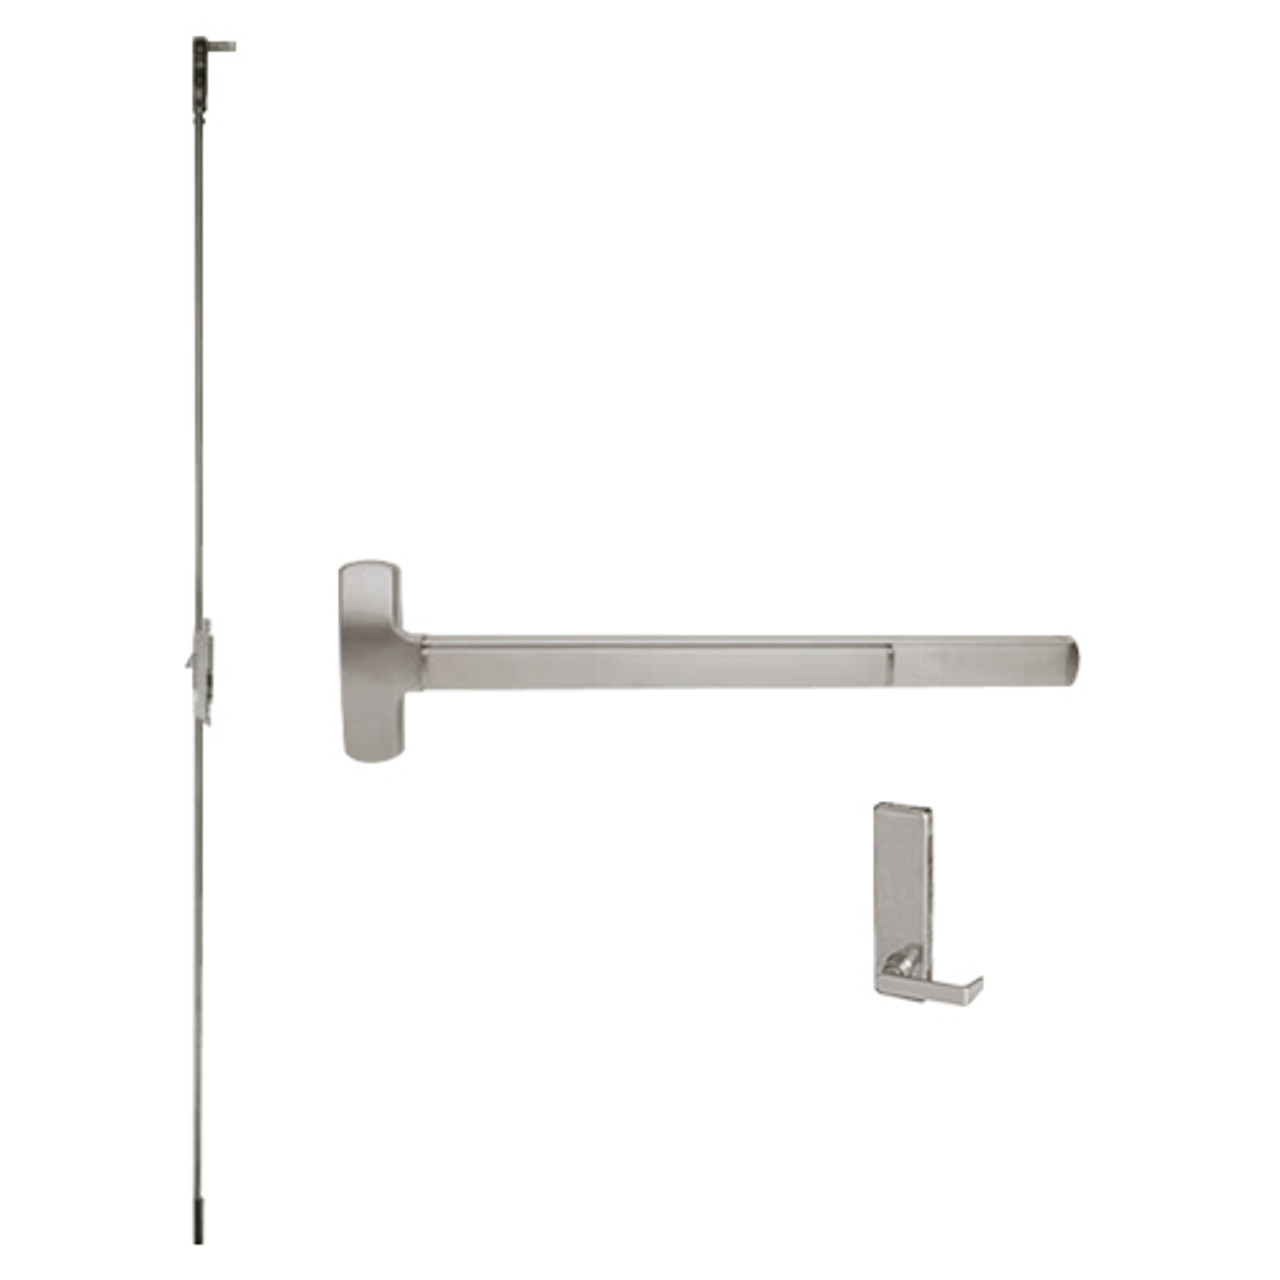 F-25-C-L-DT-DANE-US32D-4-LHR Falcon Exit Device in Satin Stainless Steel